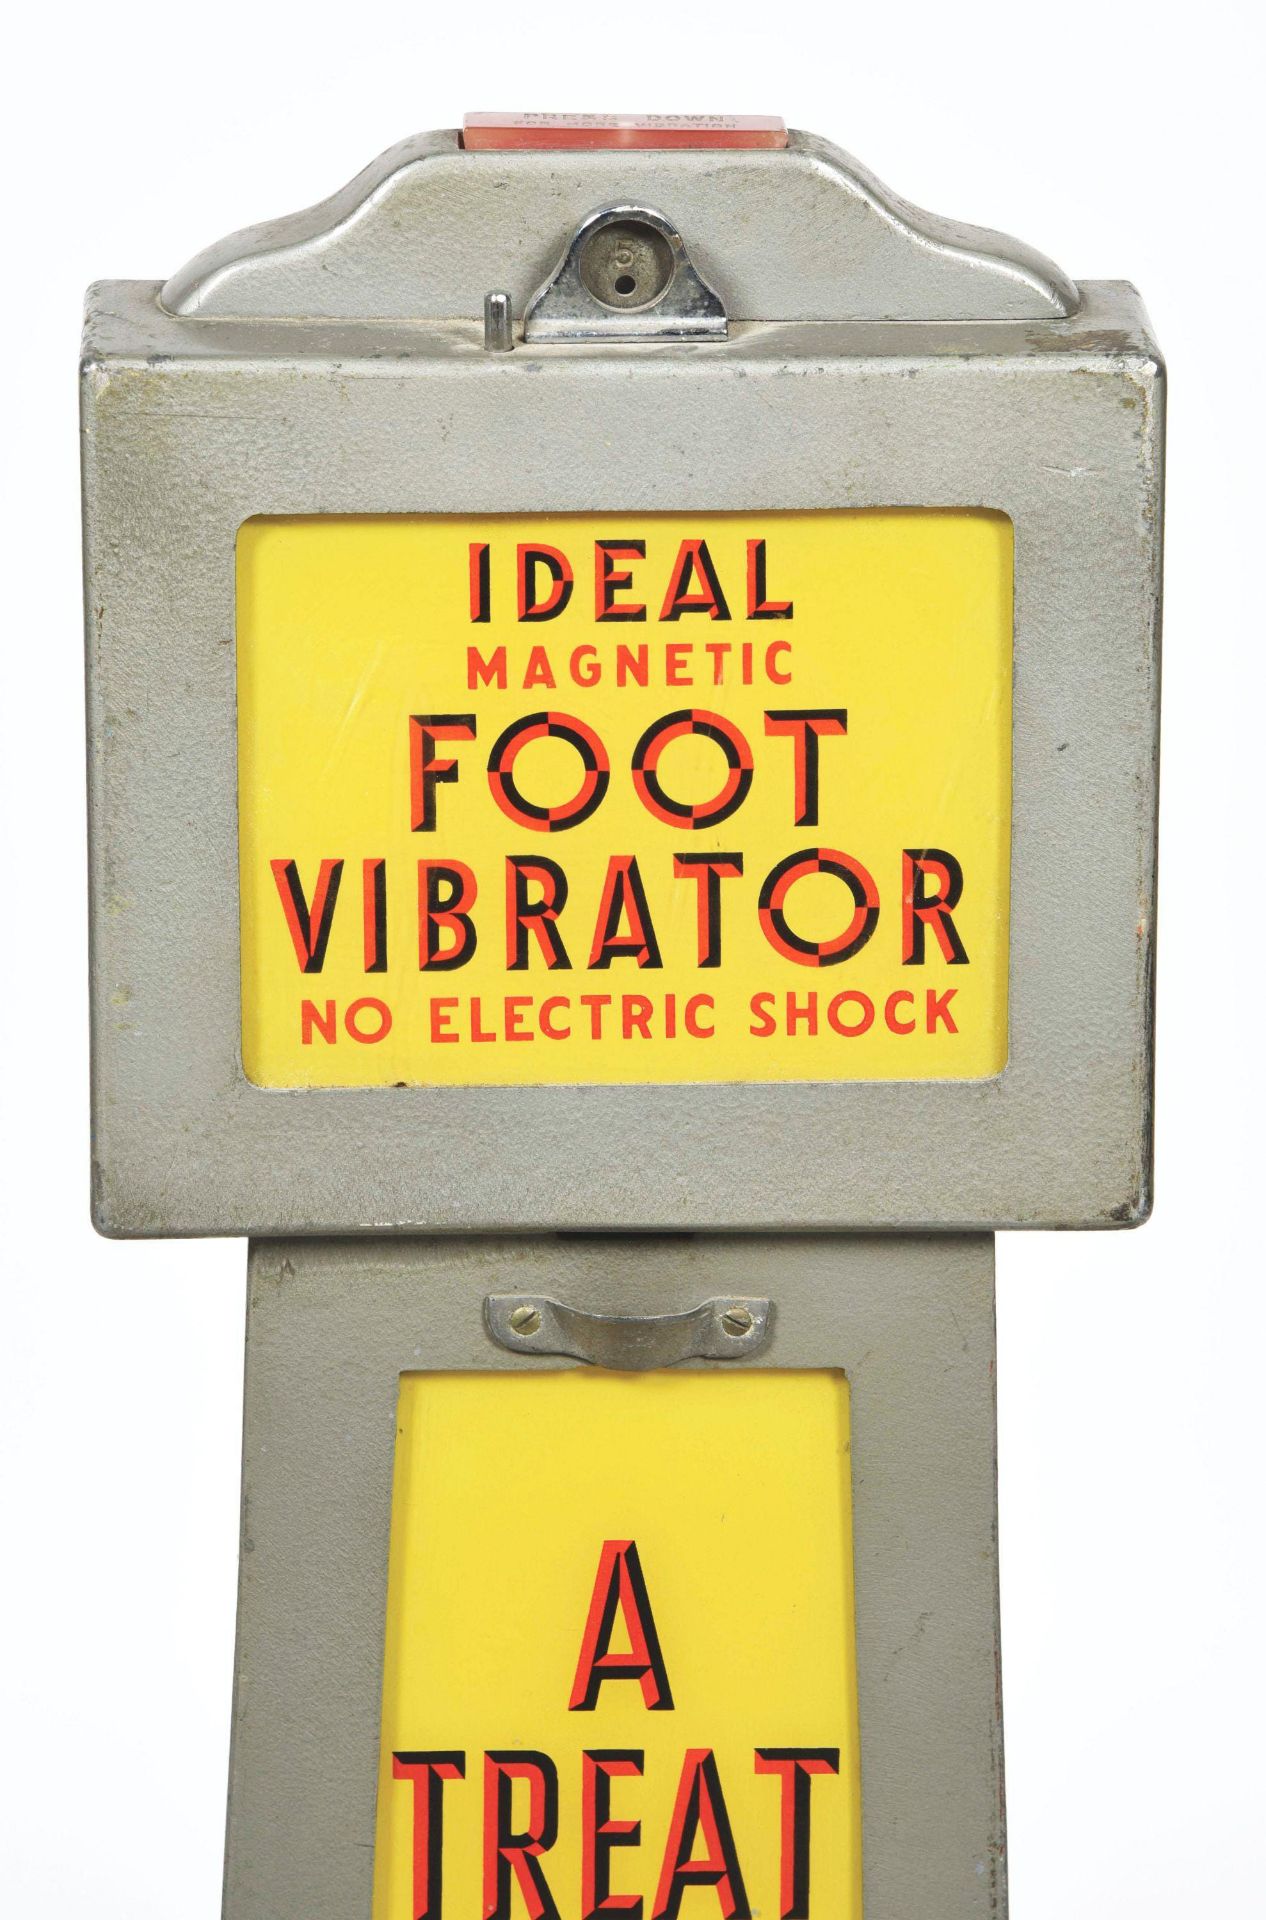 5¢ Ideal Magnetic Foot Vibrator ca. 1950 - Image 5 of 6